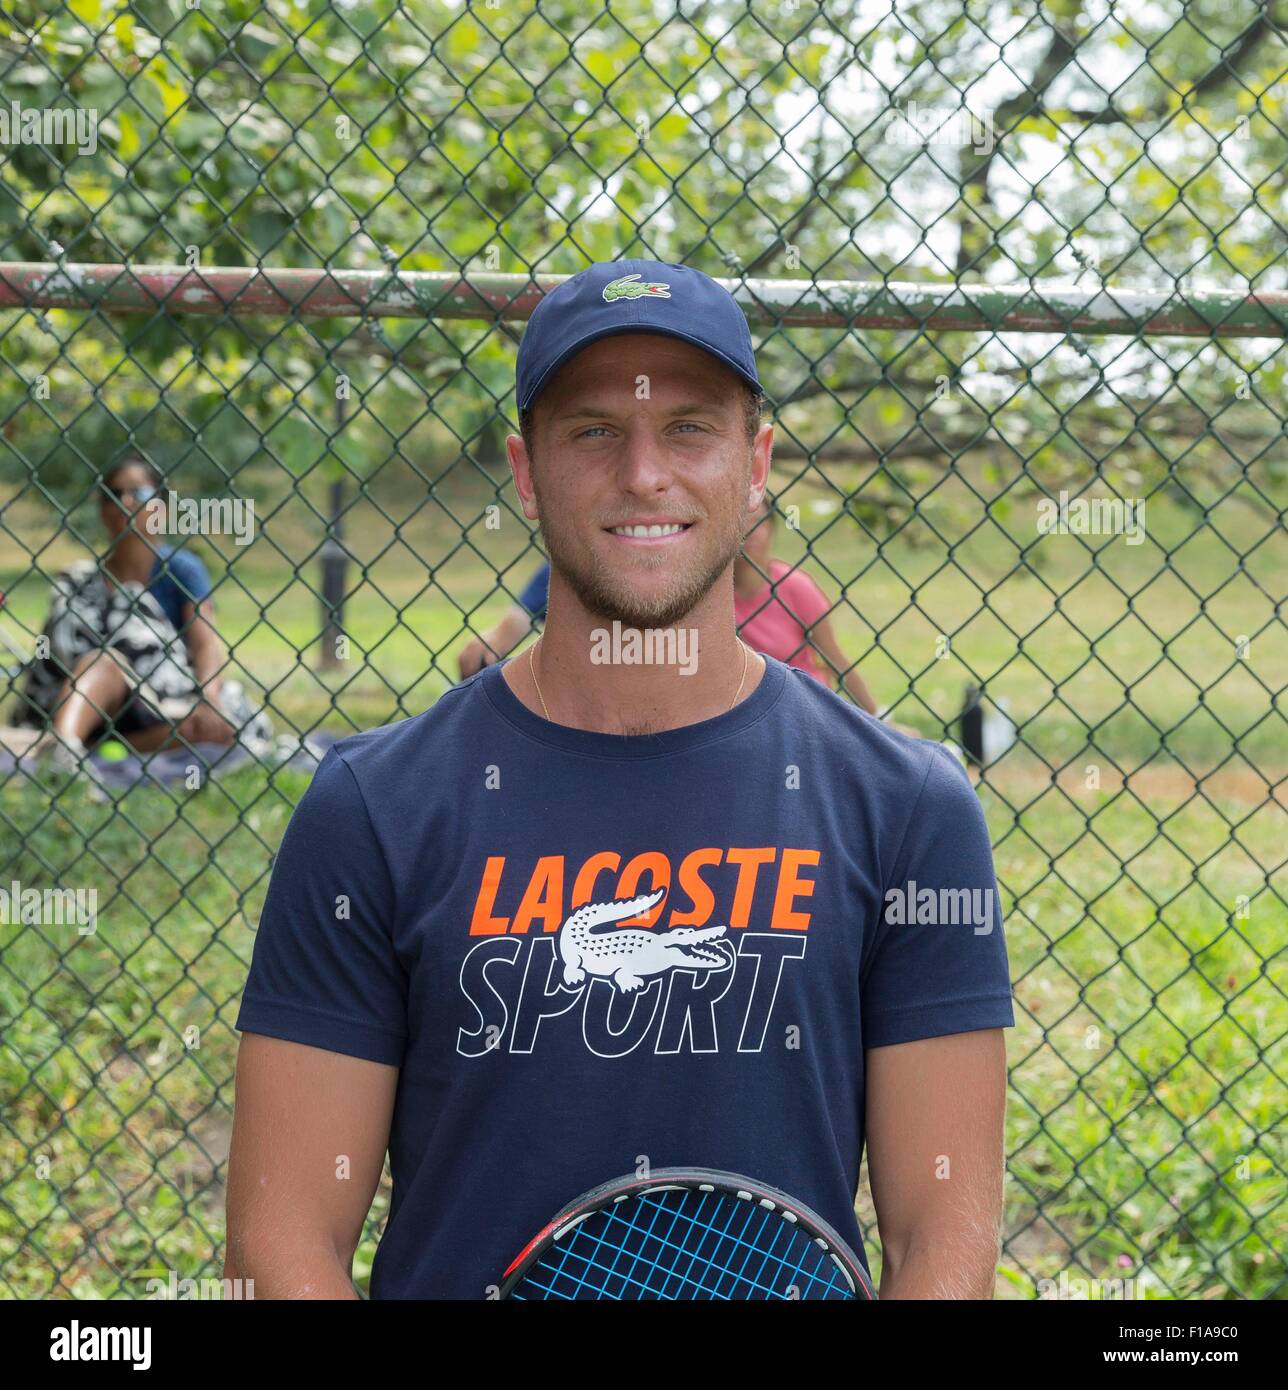 New York, NY, USA. 30th Aug, 2015. Denis Kudla in attendance for Lacoste  Ambassador Murphy Jensen Tennis Clinic, Central Park Tennis Center, New  York, NY August 30, 2015. Credit: Lev Radin/Everett Collection/Alamy